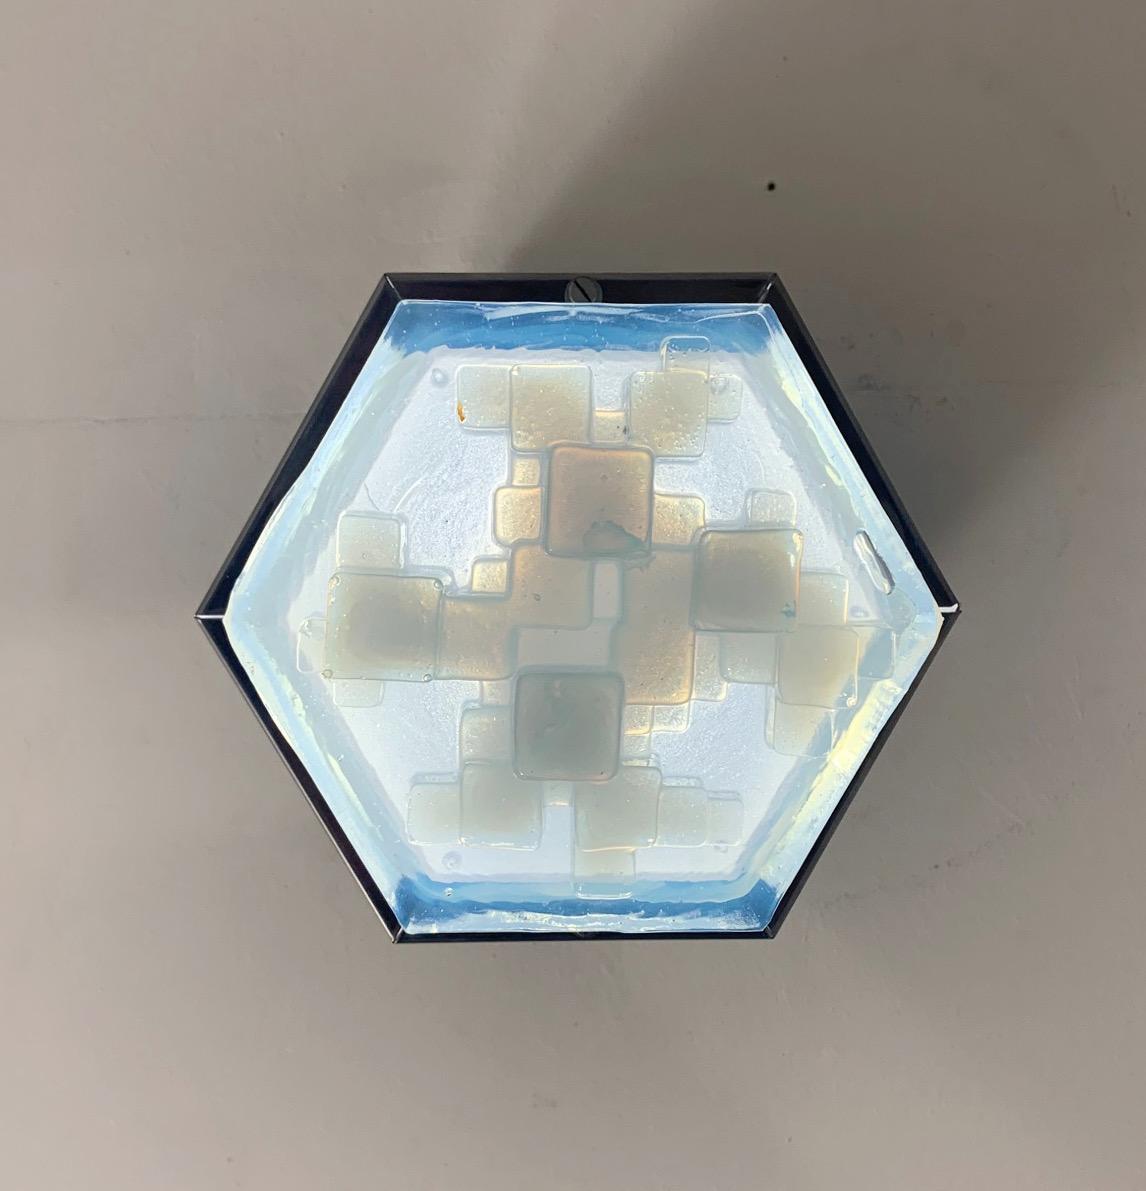 Steel Hexagonal Modular Sconces / Flush Mounts by Poliarte - 4 available For Sale